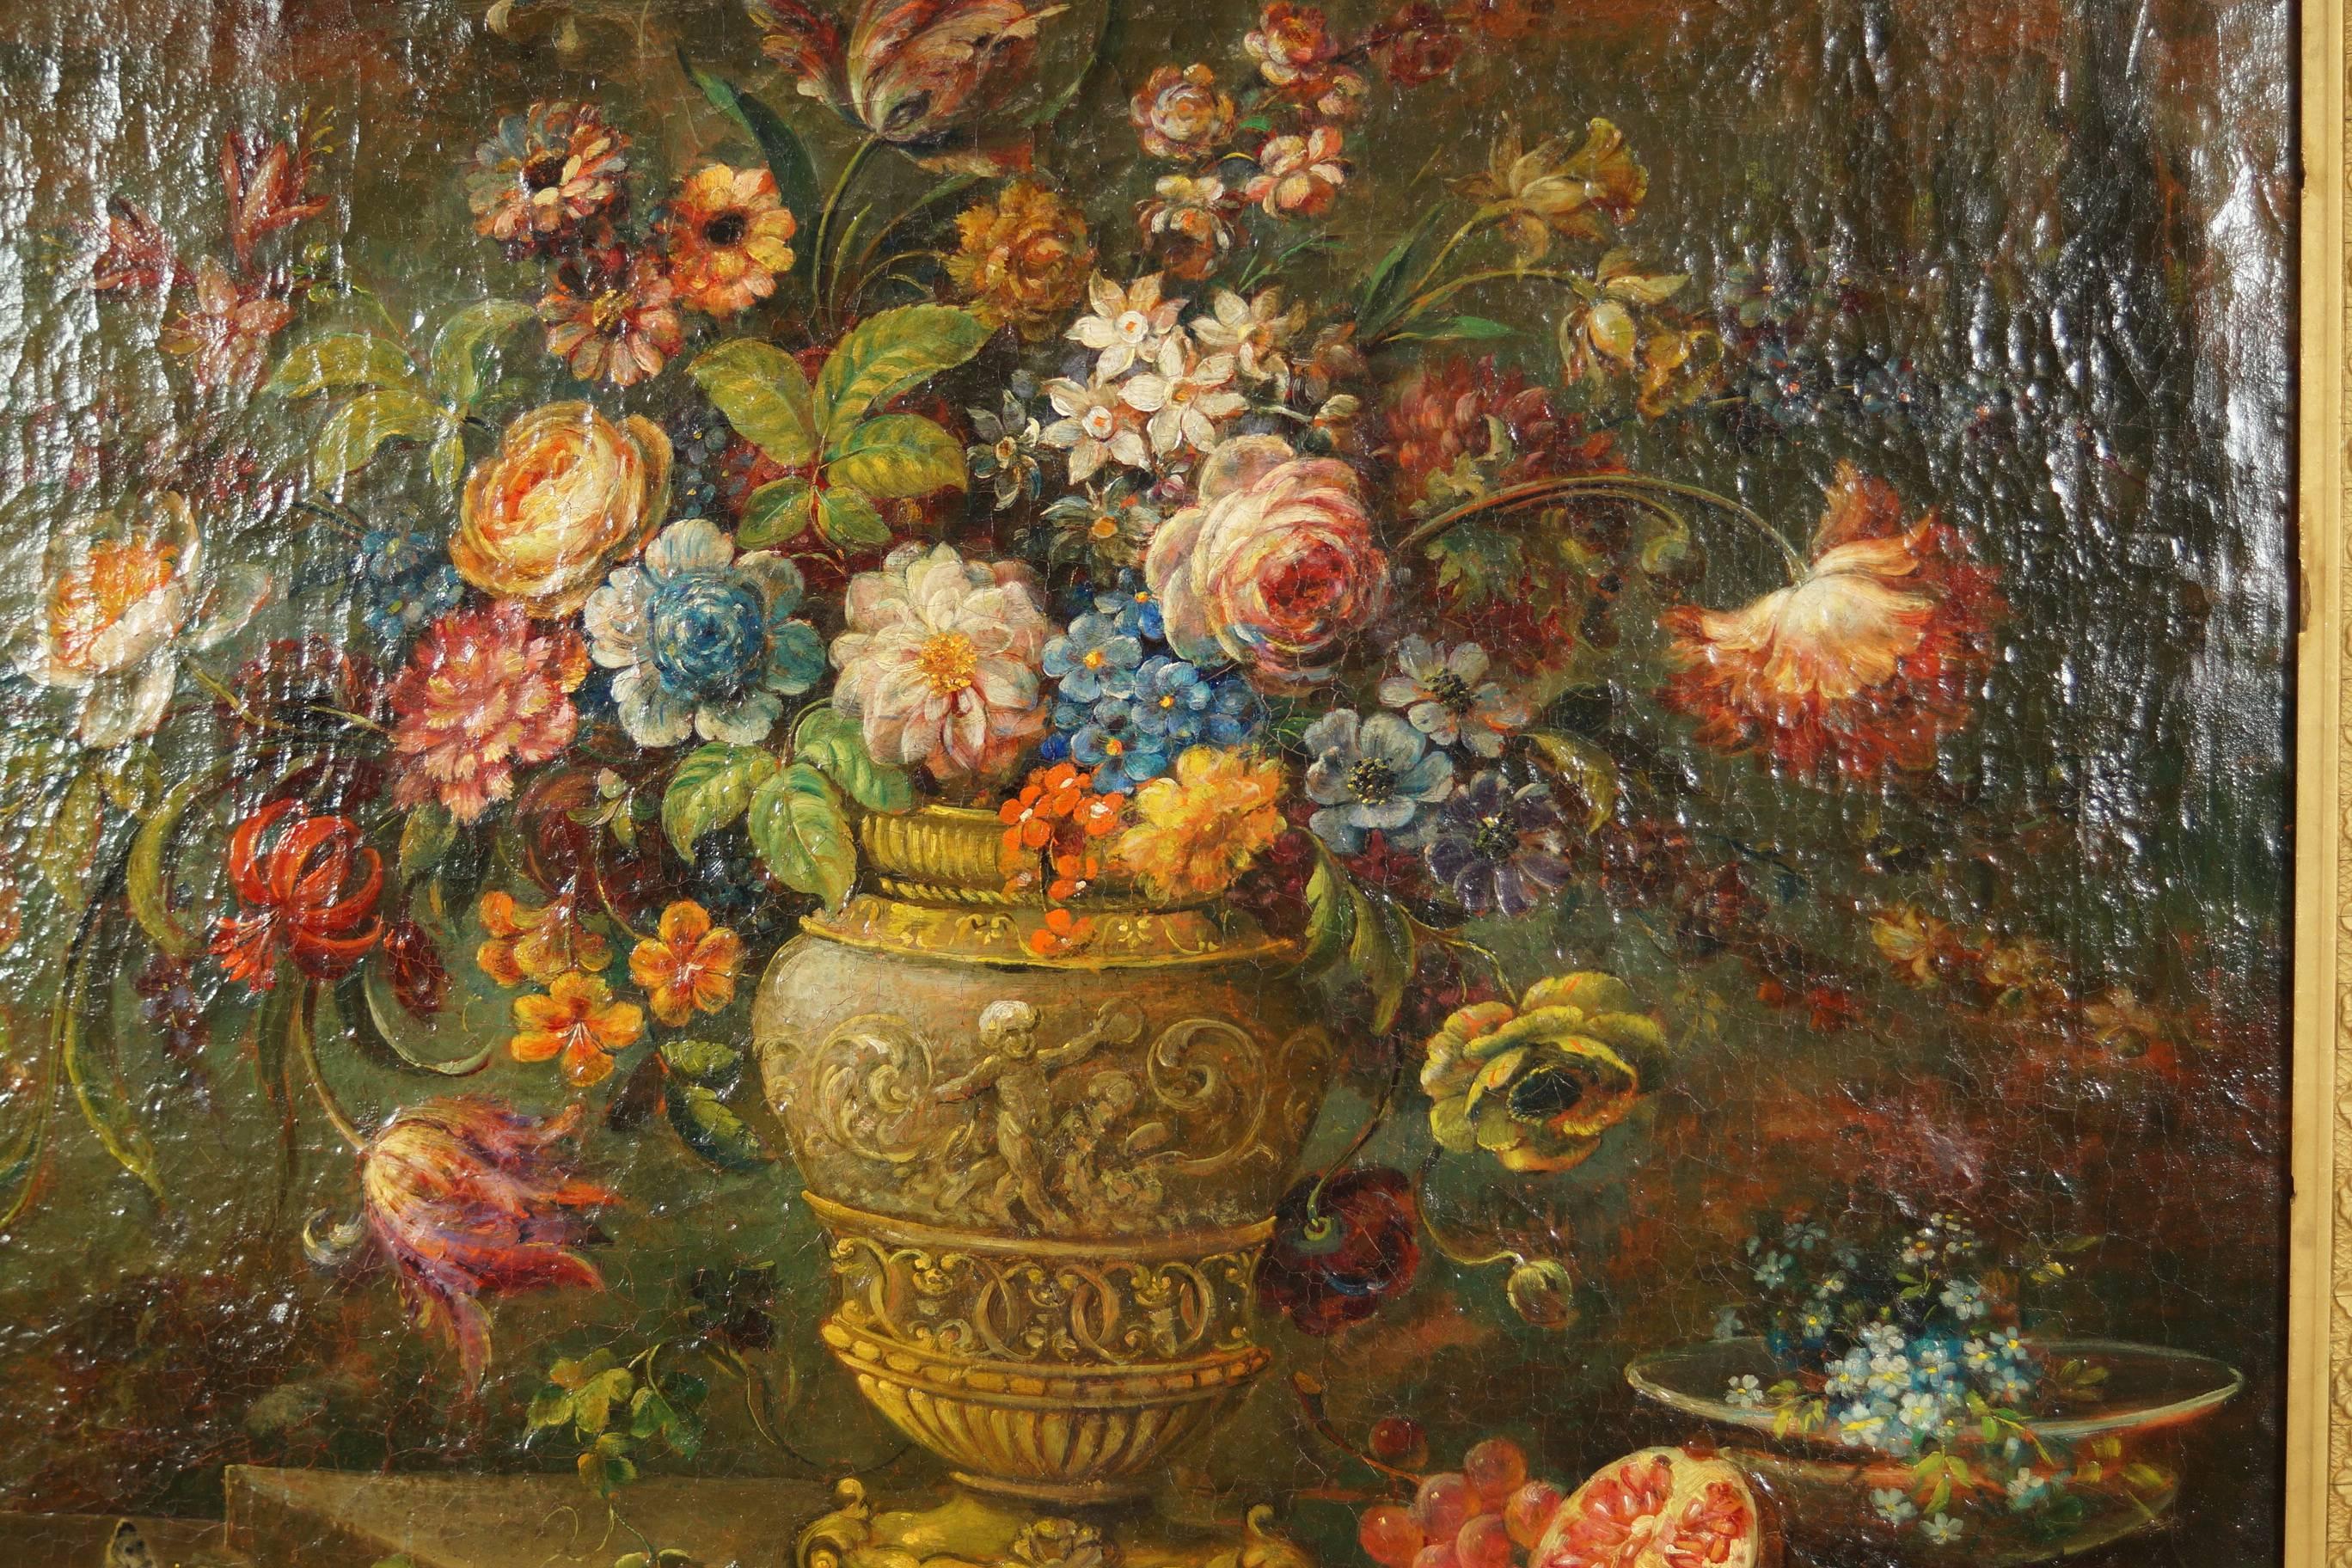 19th Century Still Life Oil on Canvas Painting with Flower Decorations